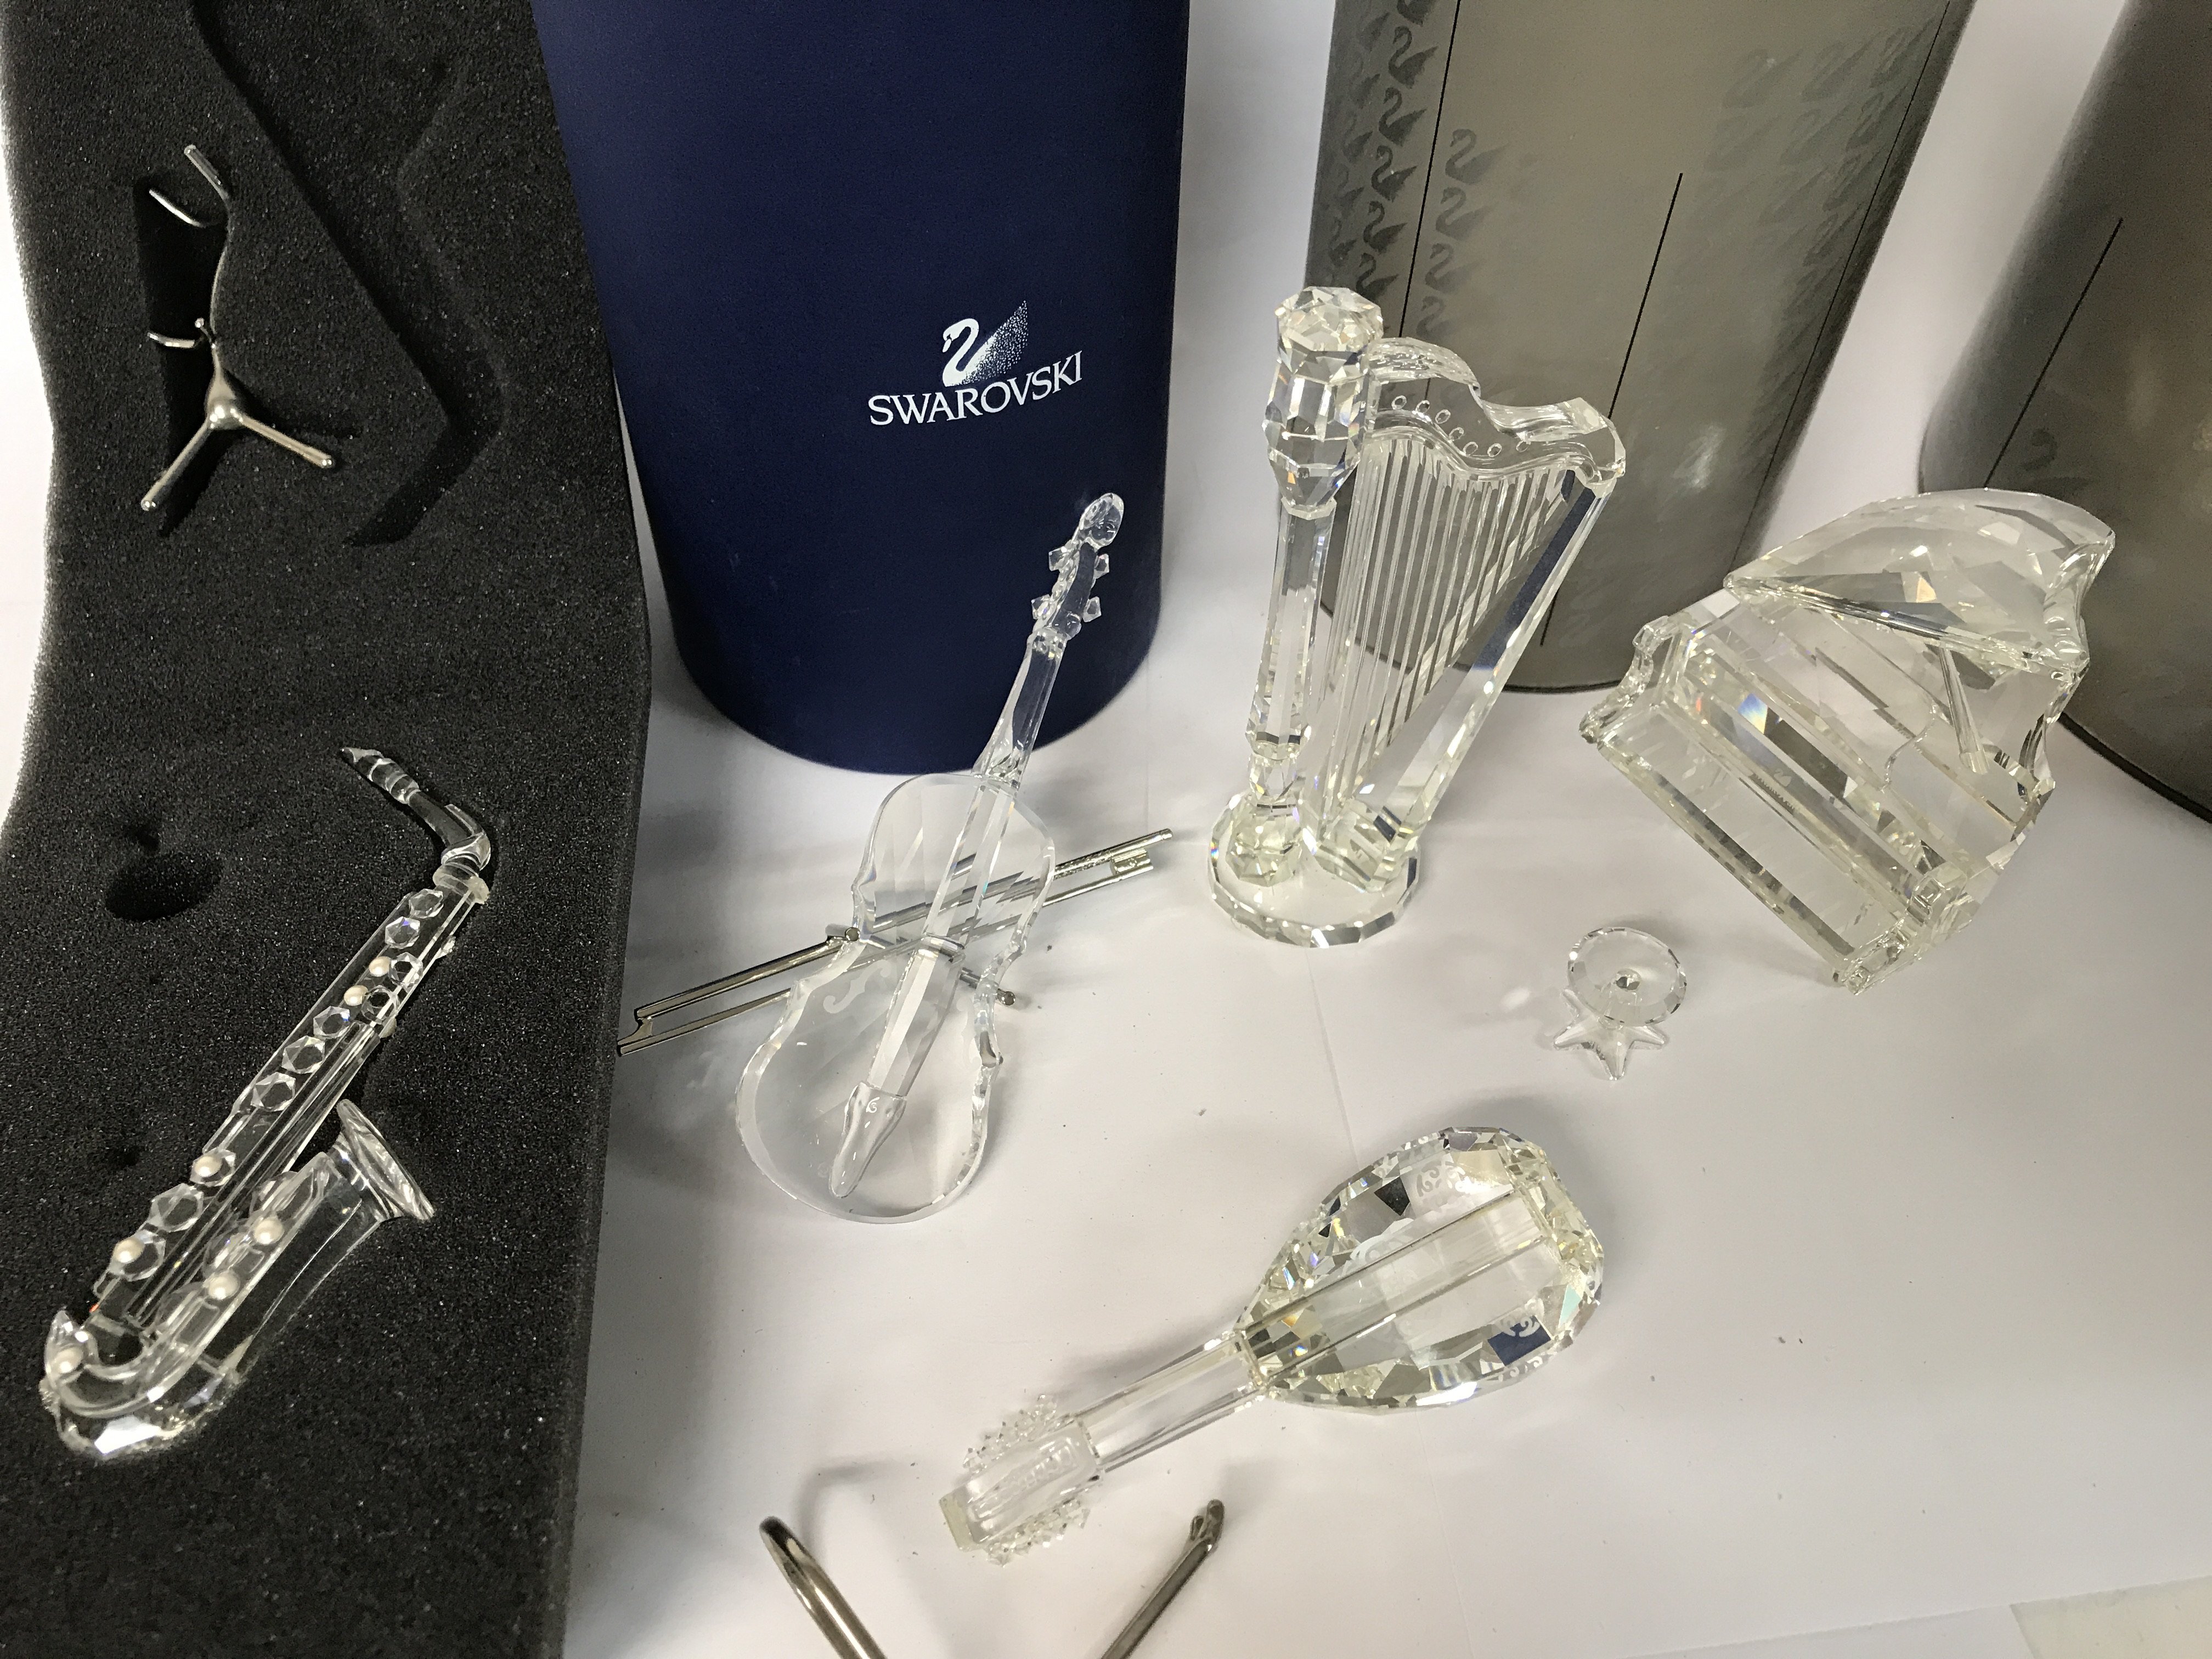 Five boxed Swarovski pieces including Violin, Saxophone, Grand Piano and Stool, Harp and Lute plus